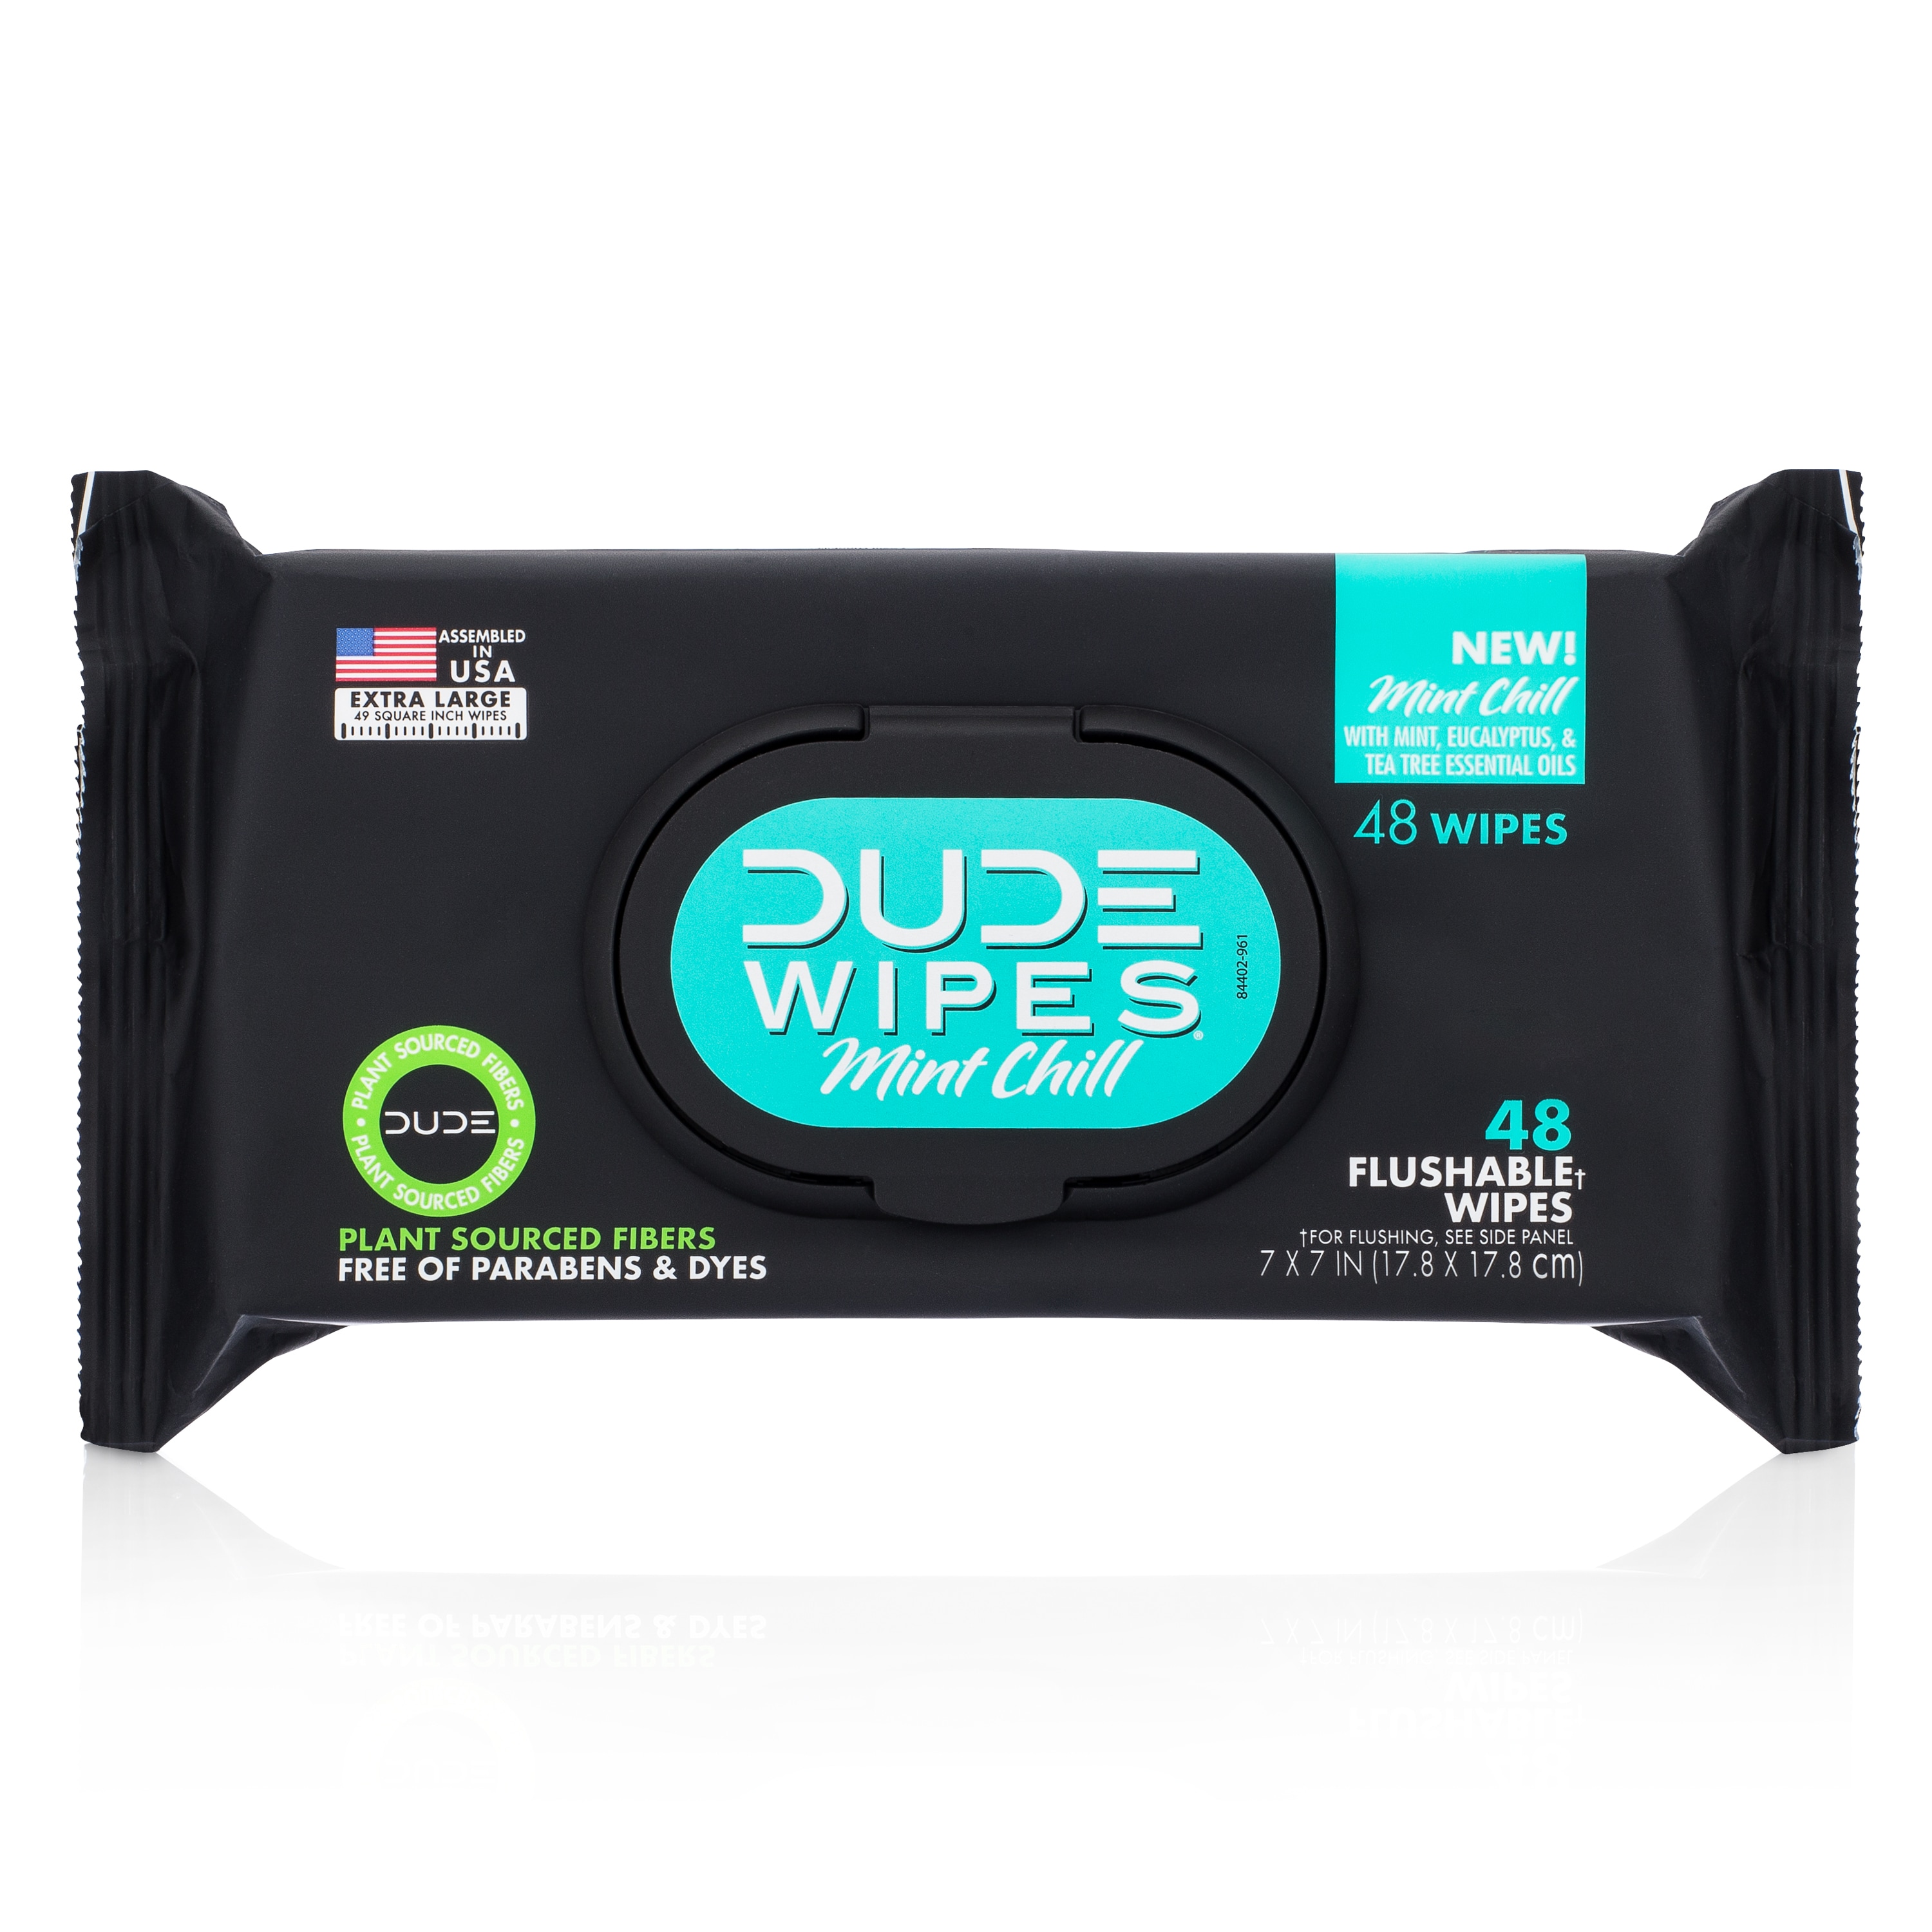 Wet wipes. Wet wipes USA. Wet wipes Design. Wet wipes Packaging Design. Chill pack